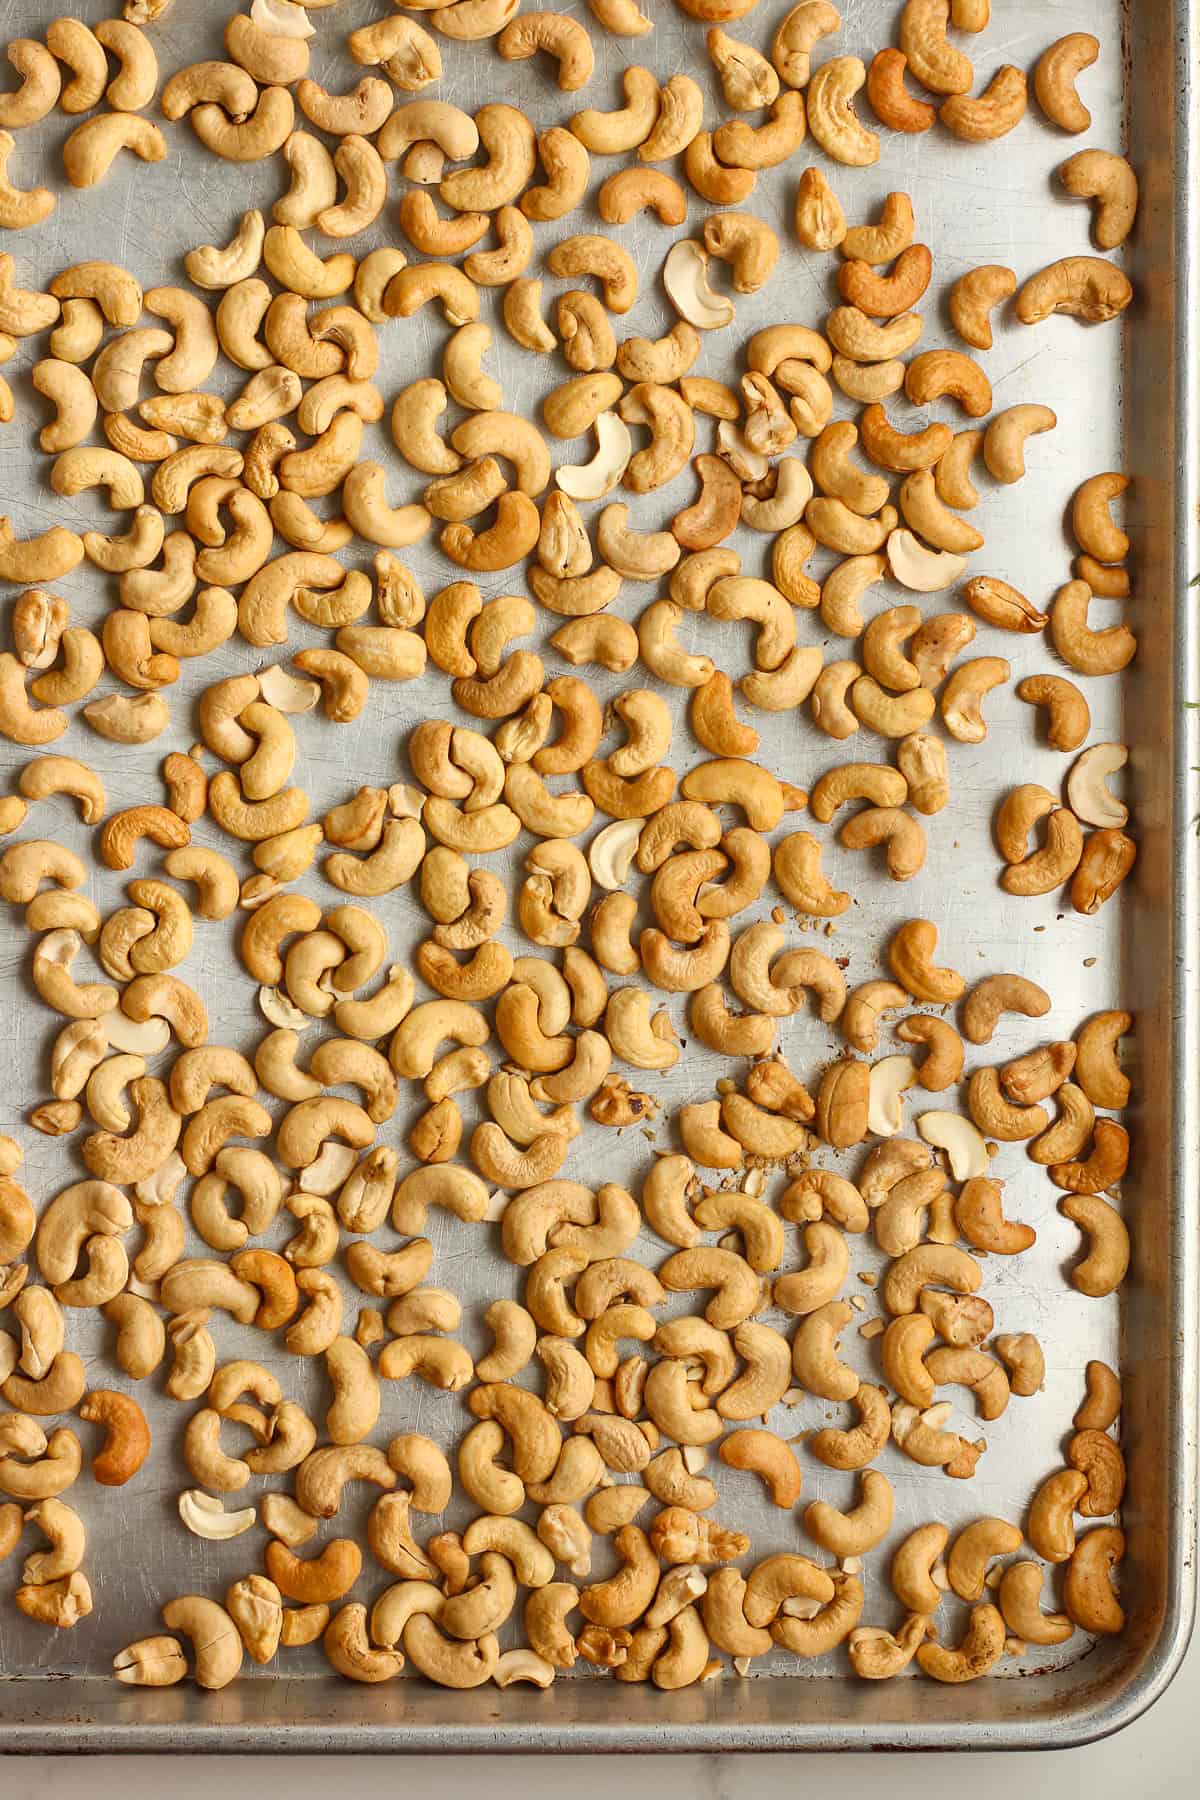 A pan of the roasted cashews.